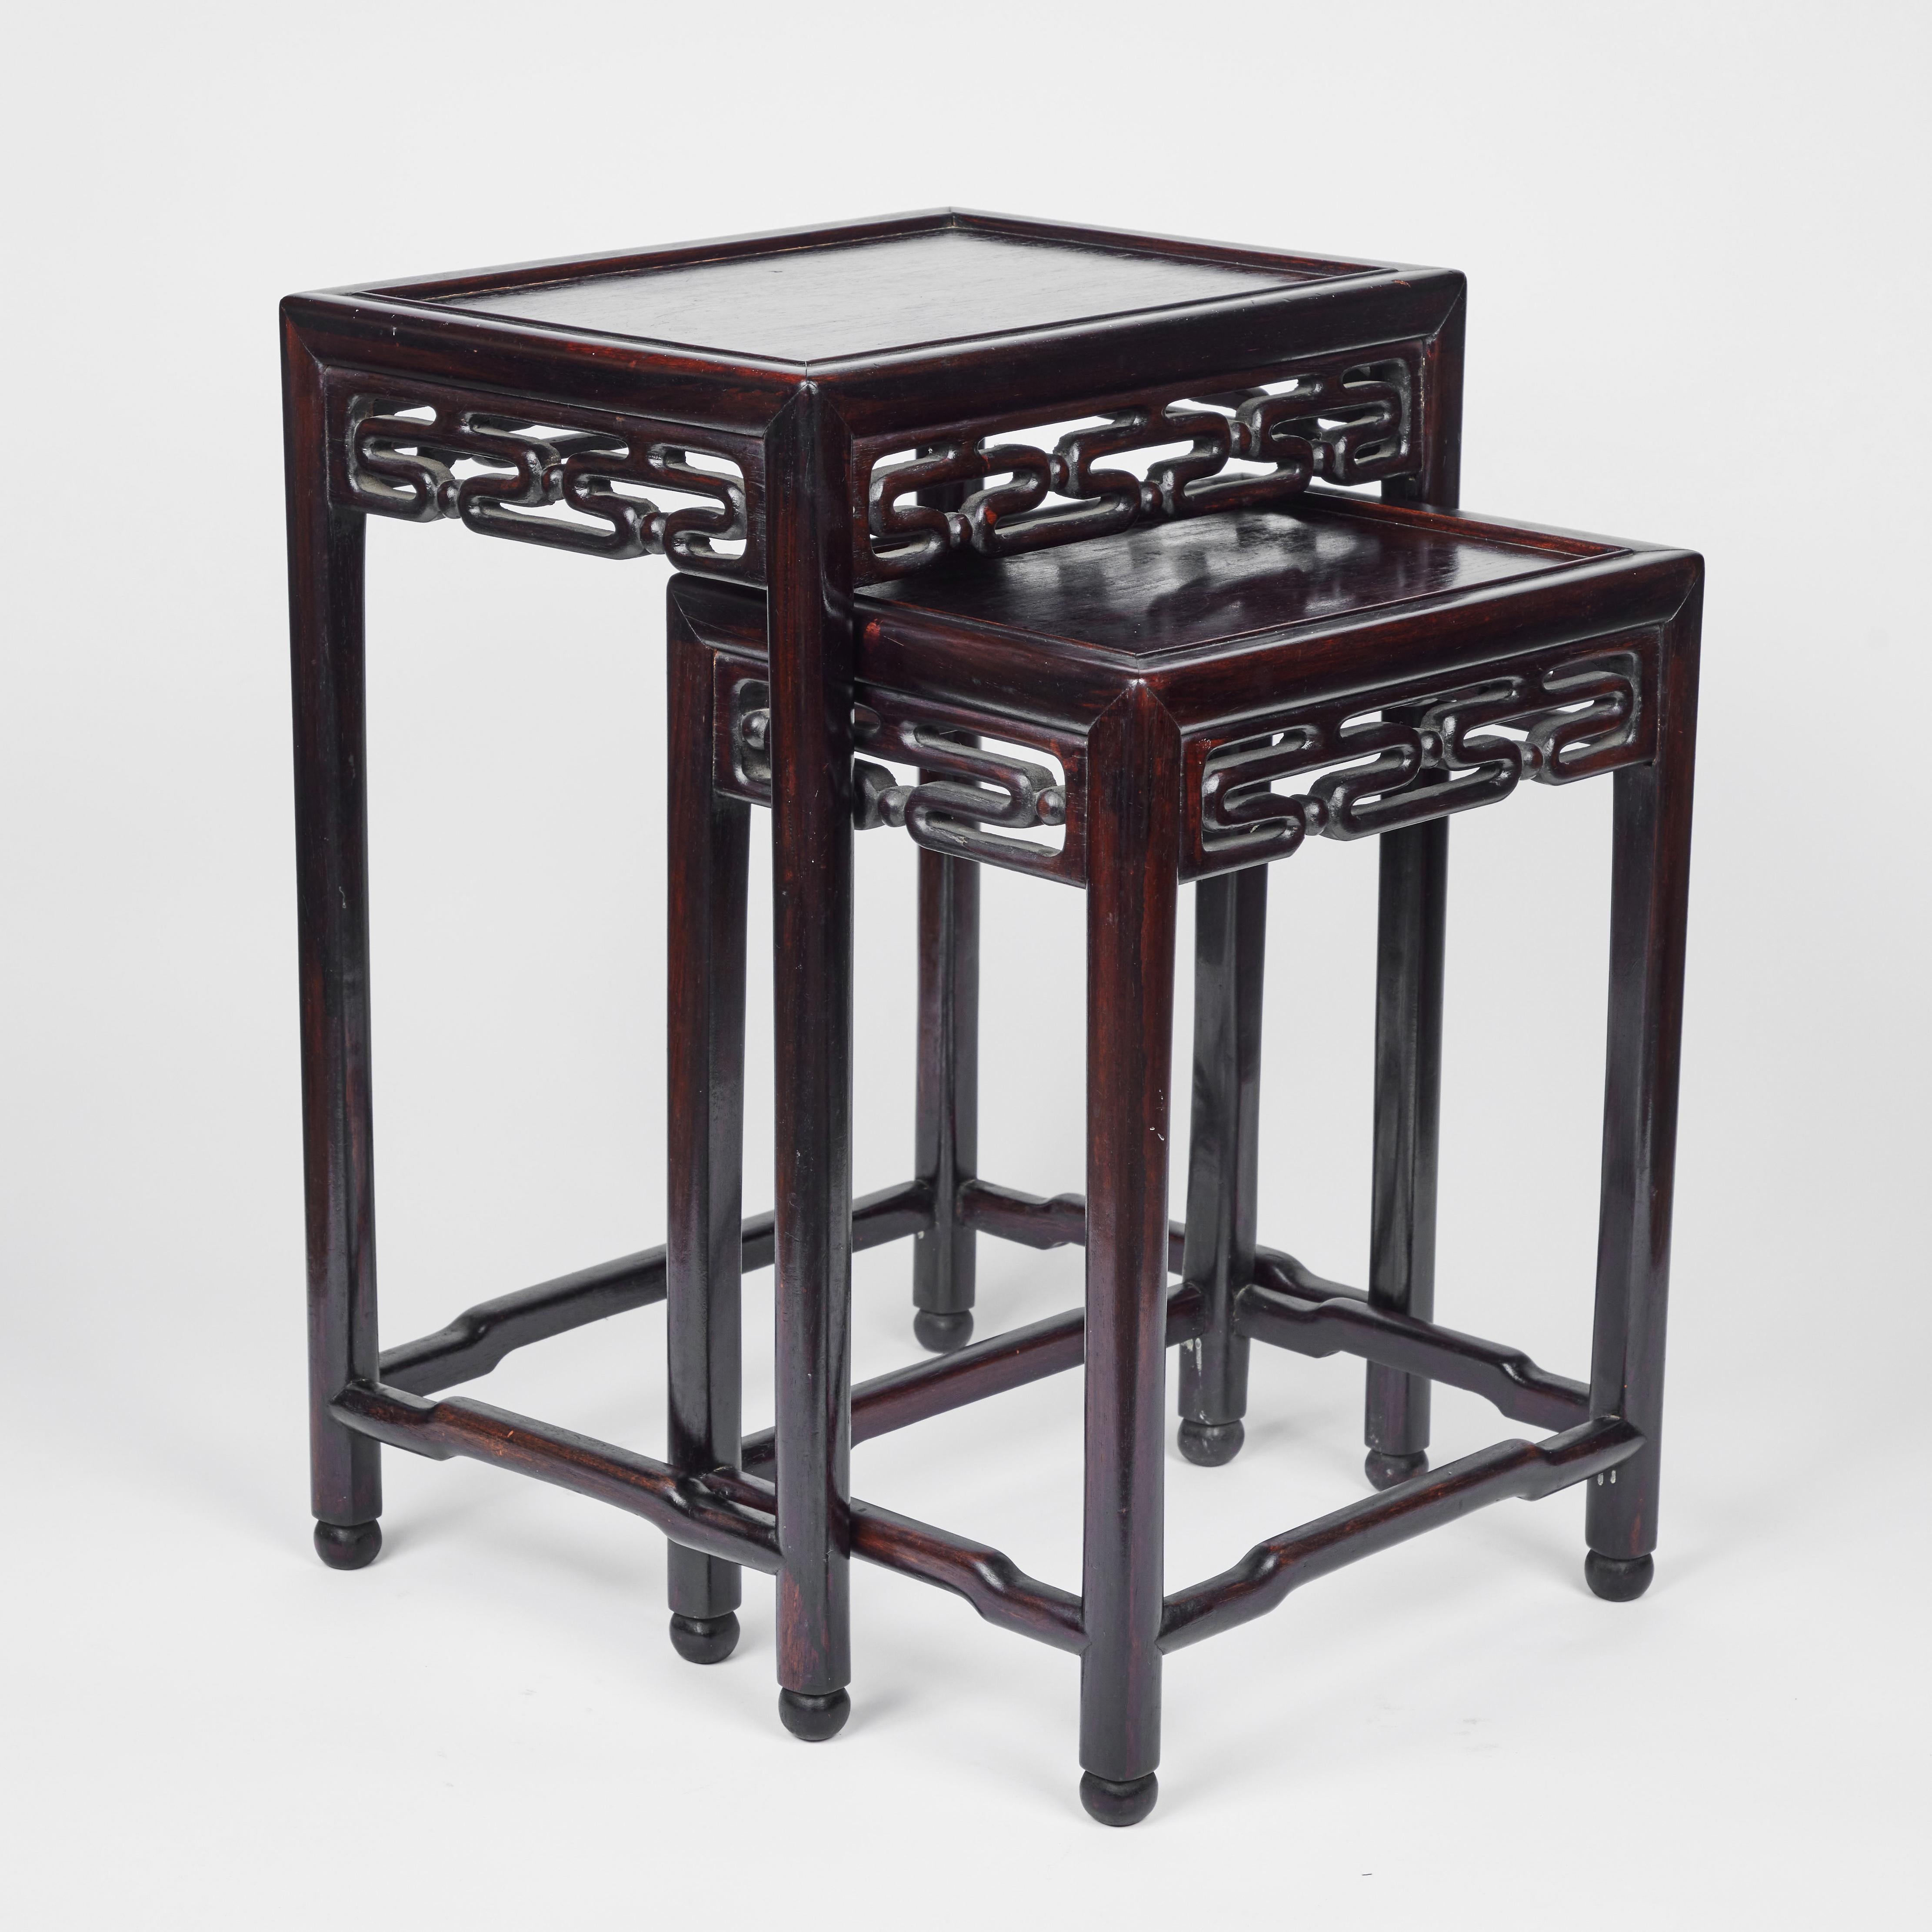 The perfect side table, this petite vintage wood 2 piece nesting table has a decorative Asian motif and maintains its elegant original dark finish.

Medium measures: 16.5